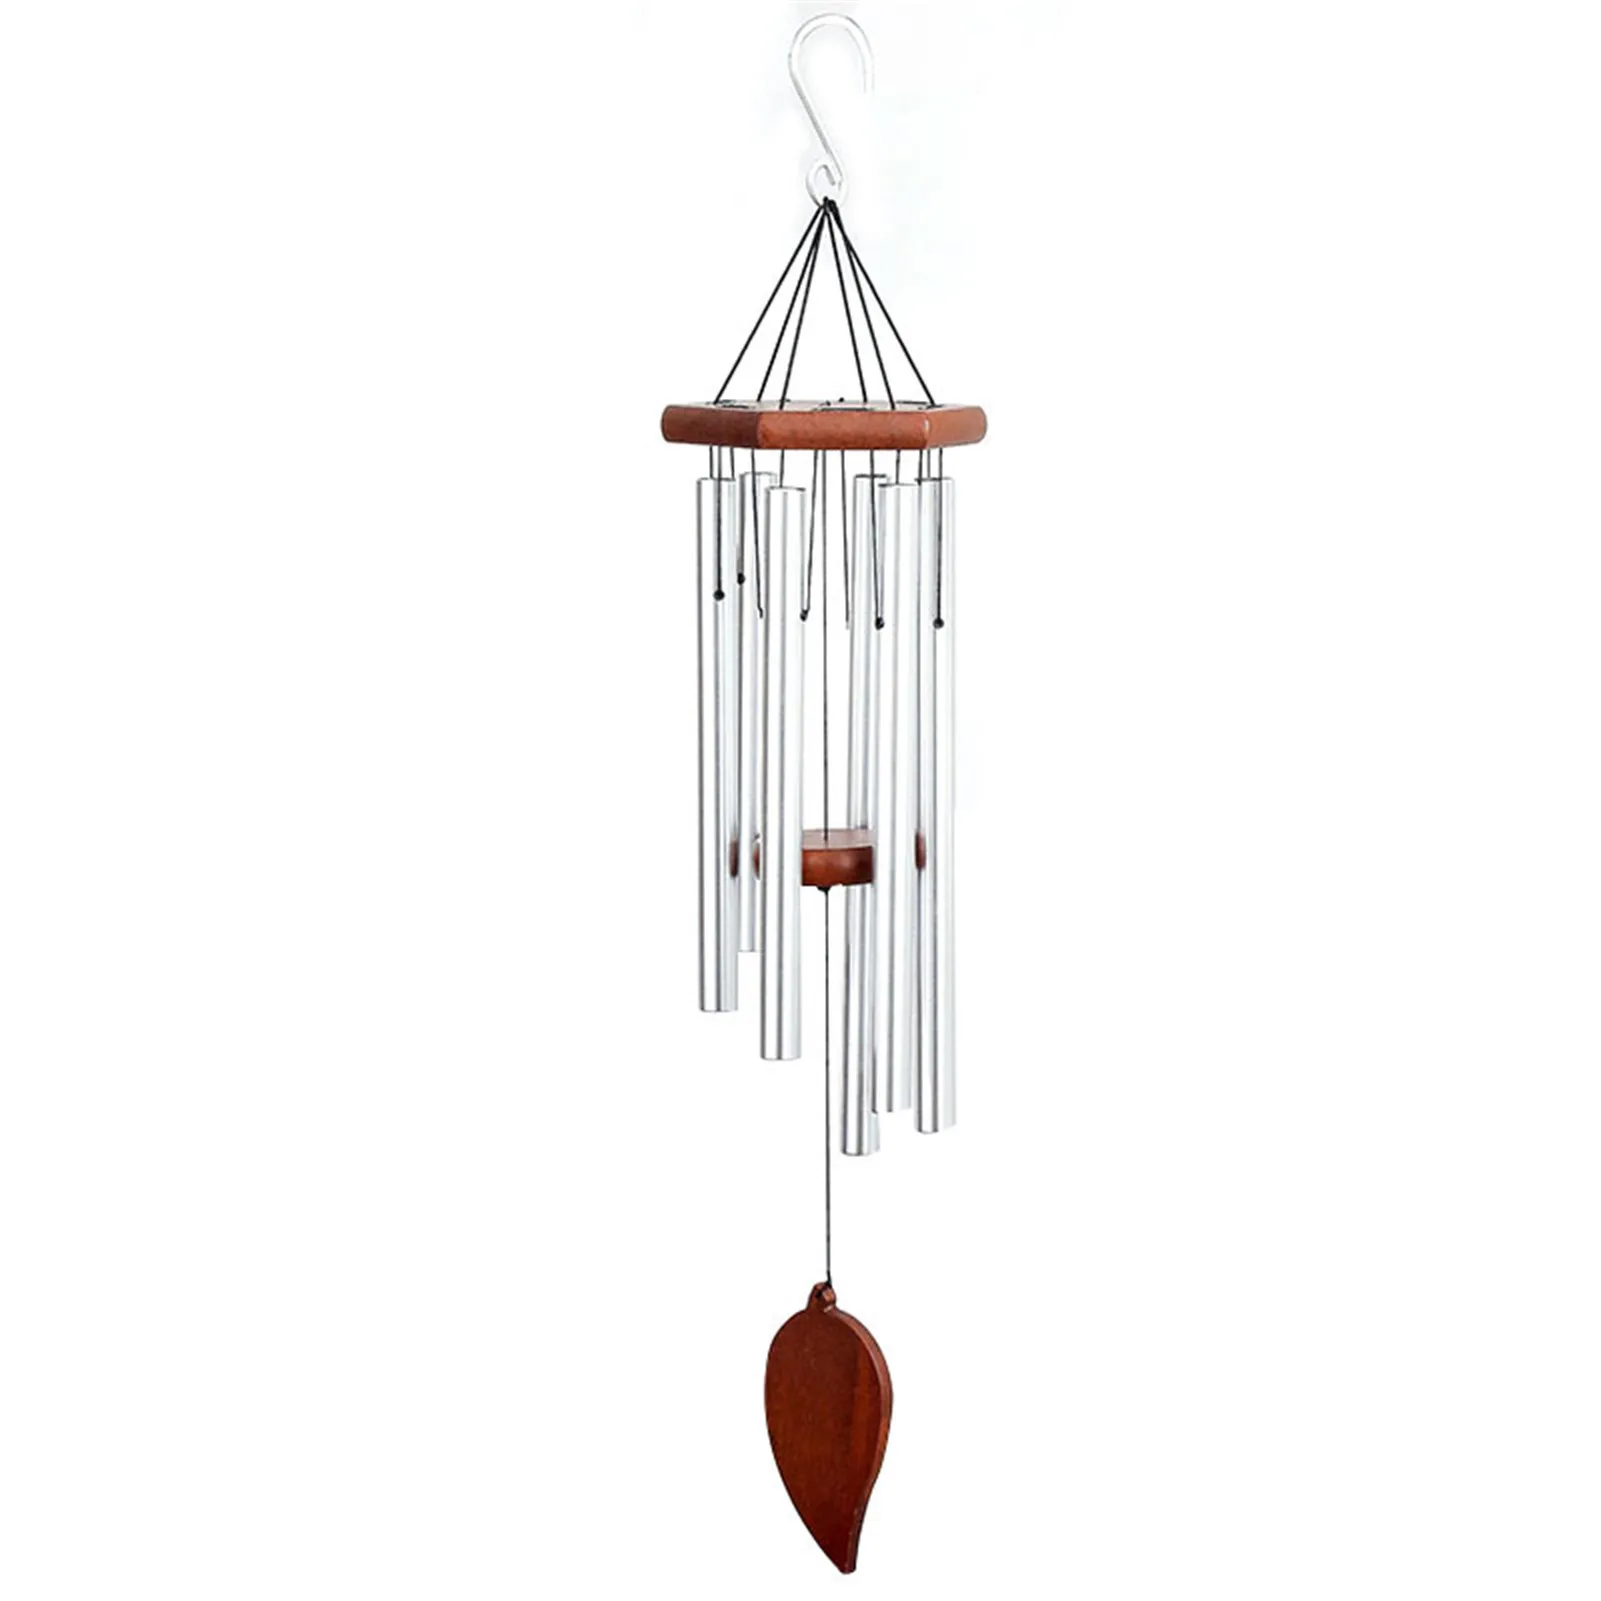 

Wind Chimes With Heavy Metal Tubes Adjustable Tubes Suitable For Gifts For Lovers Garden Decorations